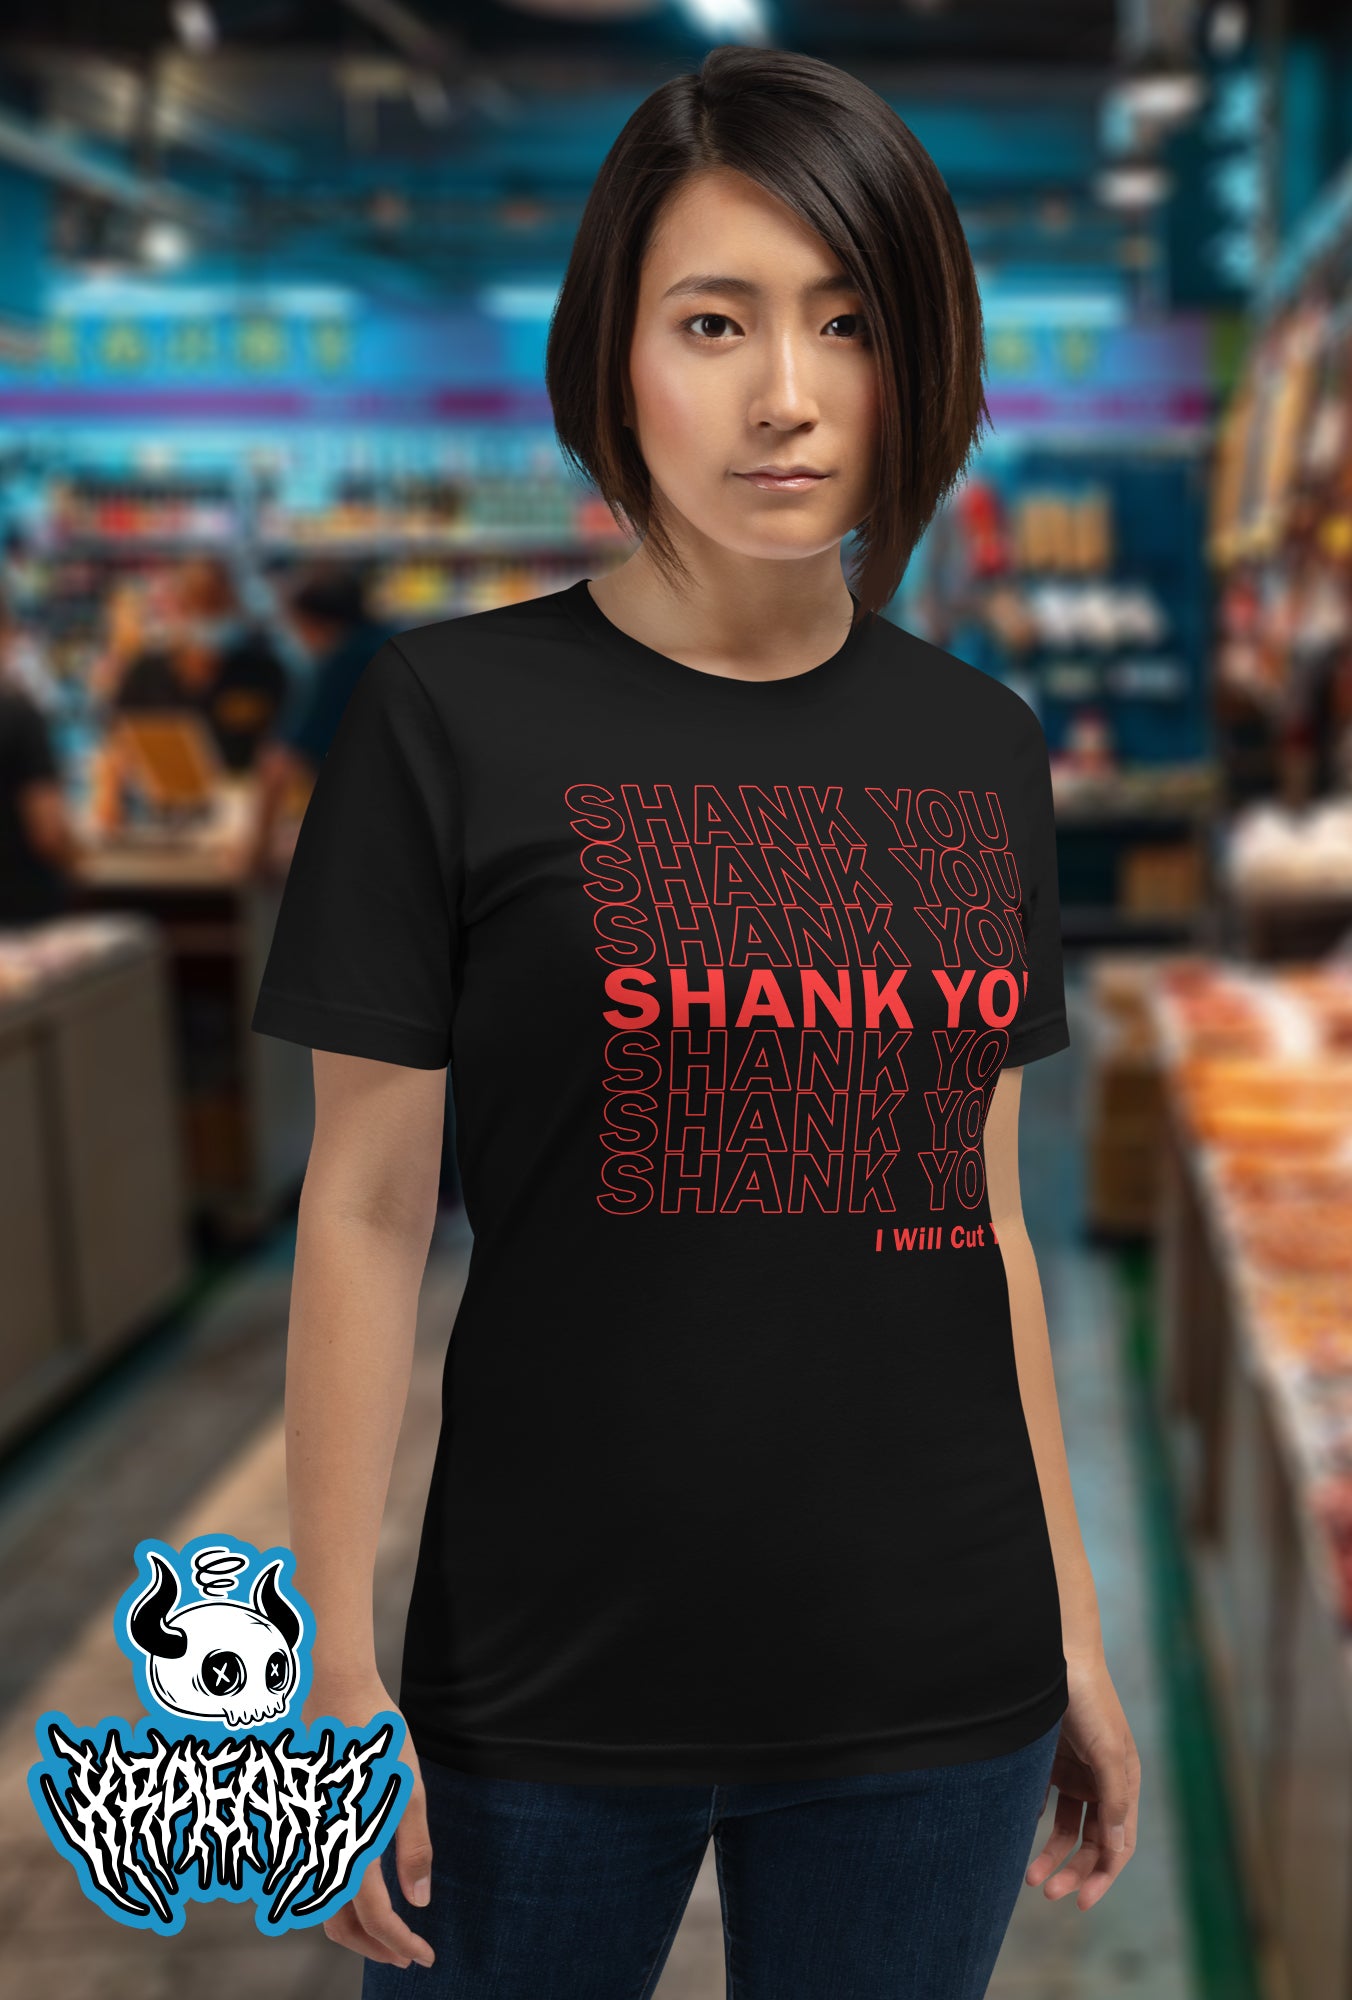 SHANK YOU VERY MUCH T-SHIRT